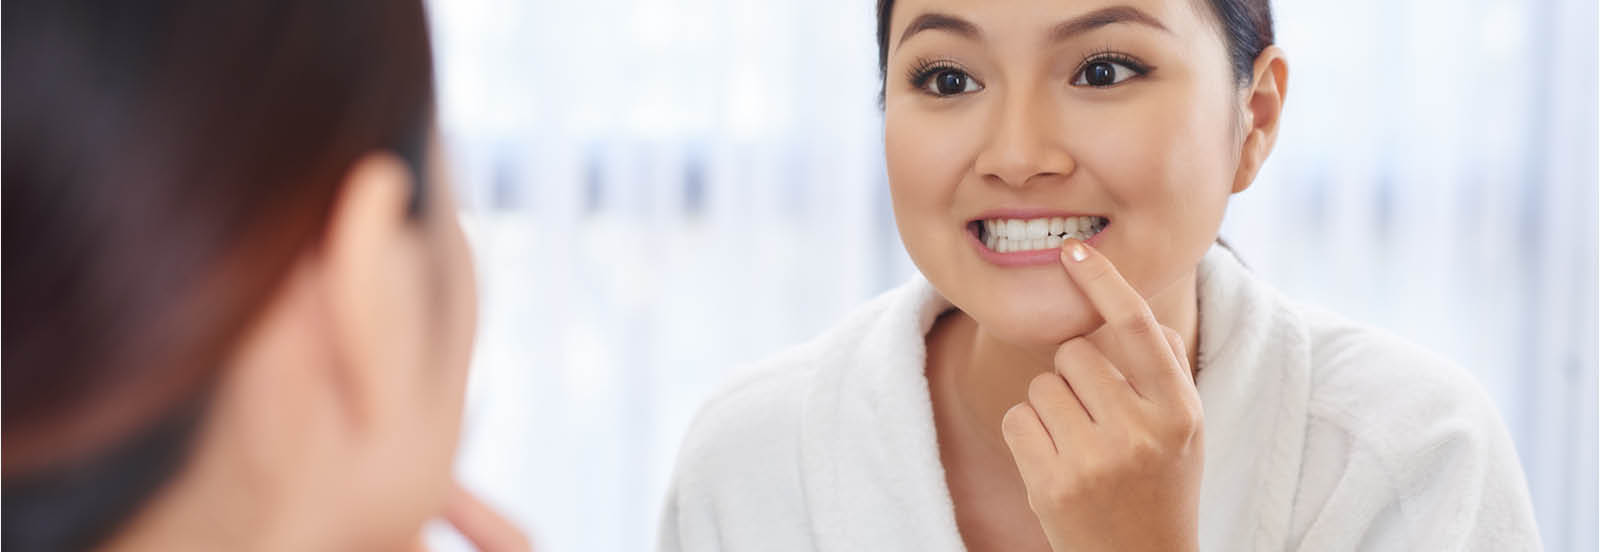 young woman looking at teeth and gums in the mirror 1600X552.jpg